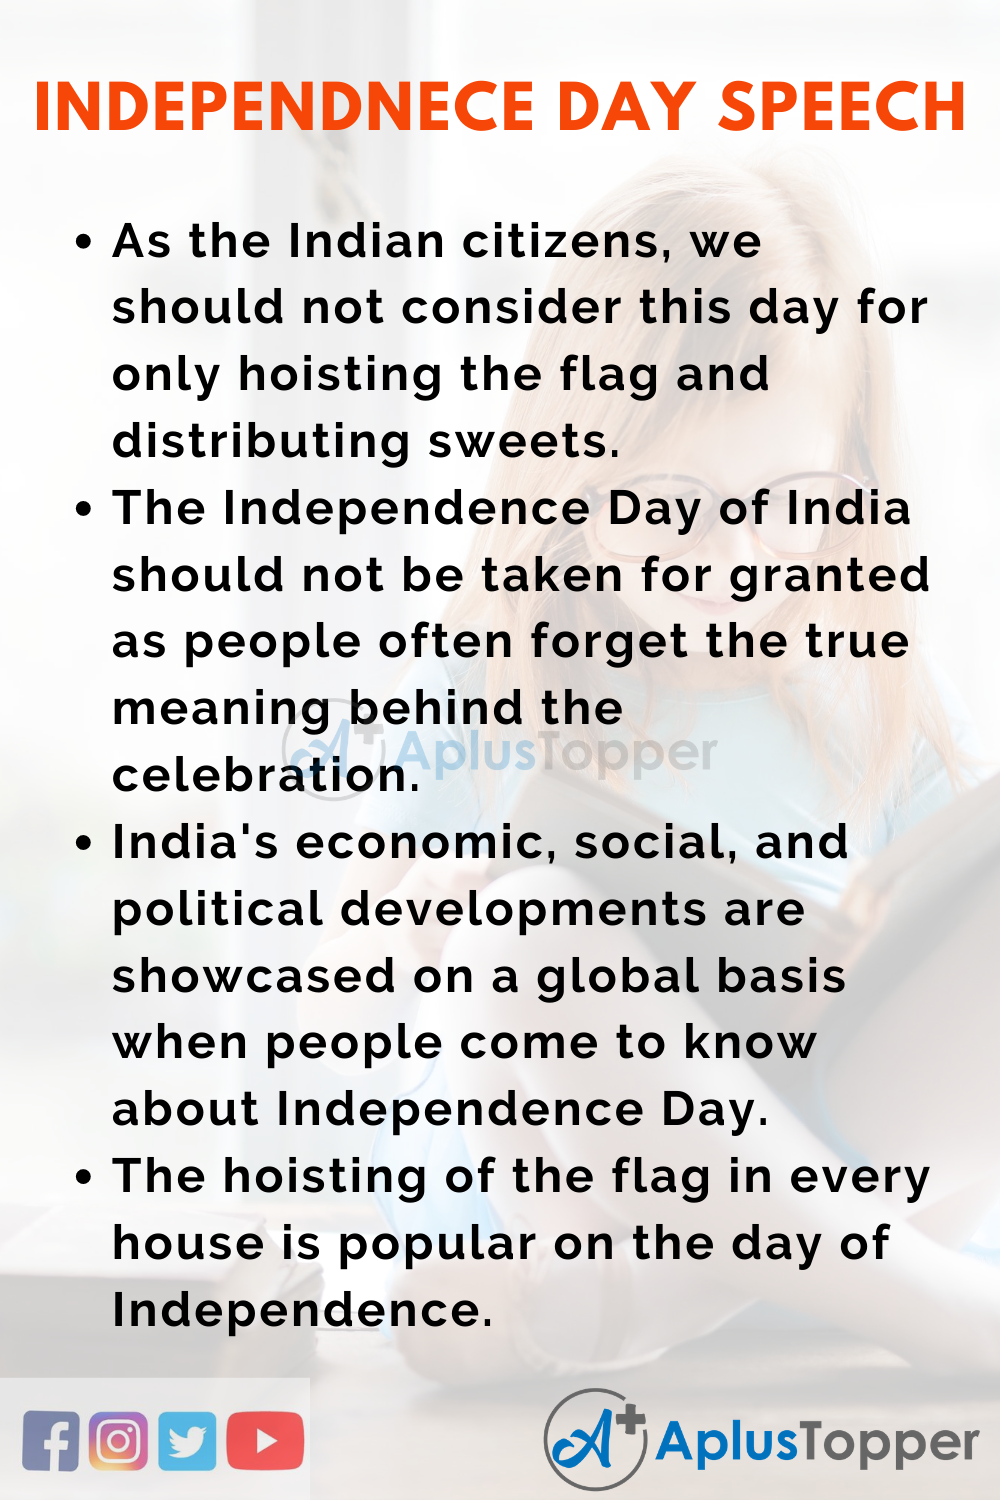 a short speech on independence day